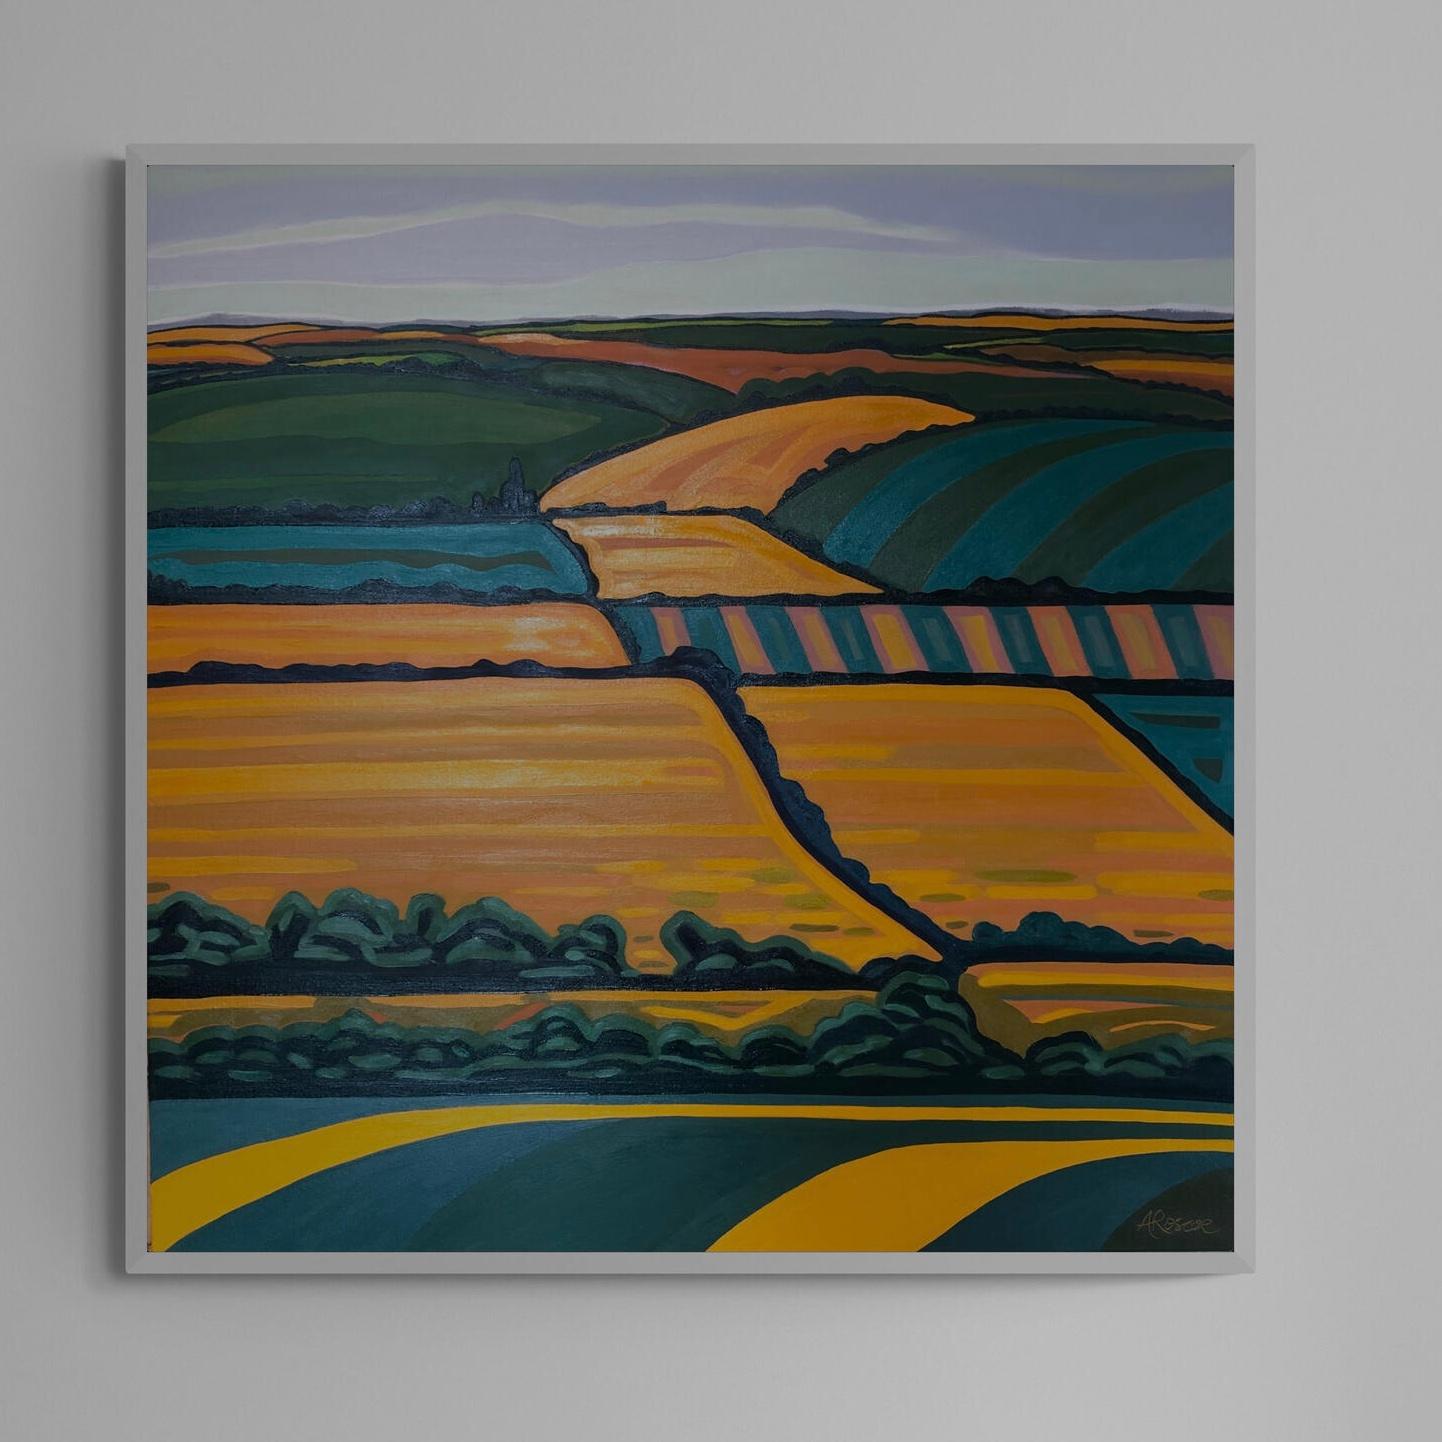 Hill View no. 2 is an original oil painting by artist Alexa Roscoe. This painting has calm feeling capturing a beautiful light and depth in the horizon. This is a vibrant landscape painting with strong bold lines which seem to flow freely down the